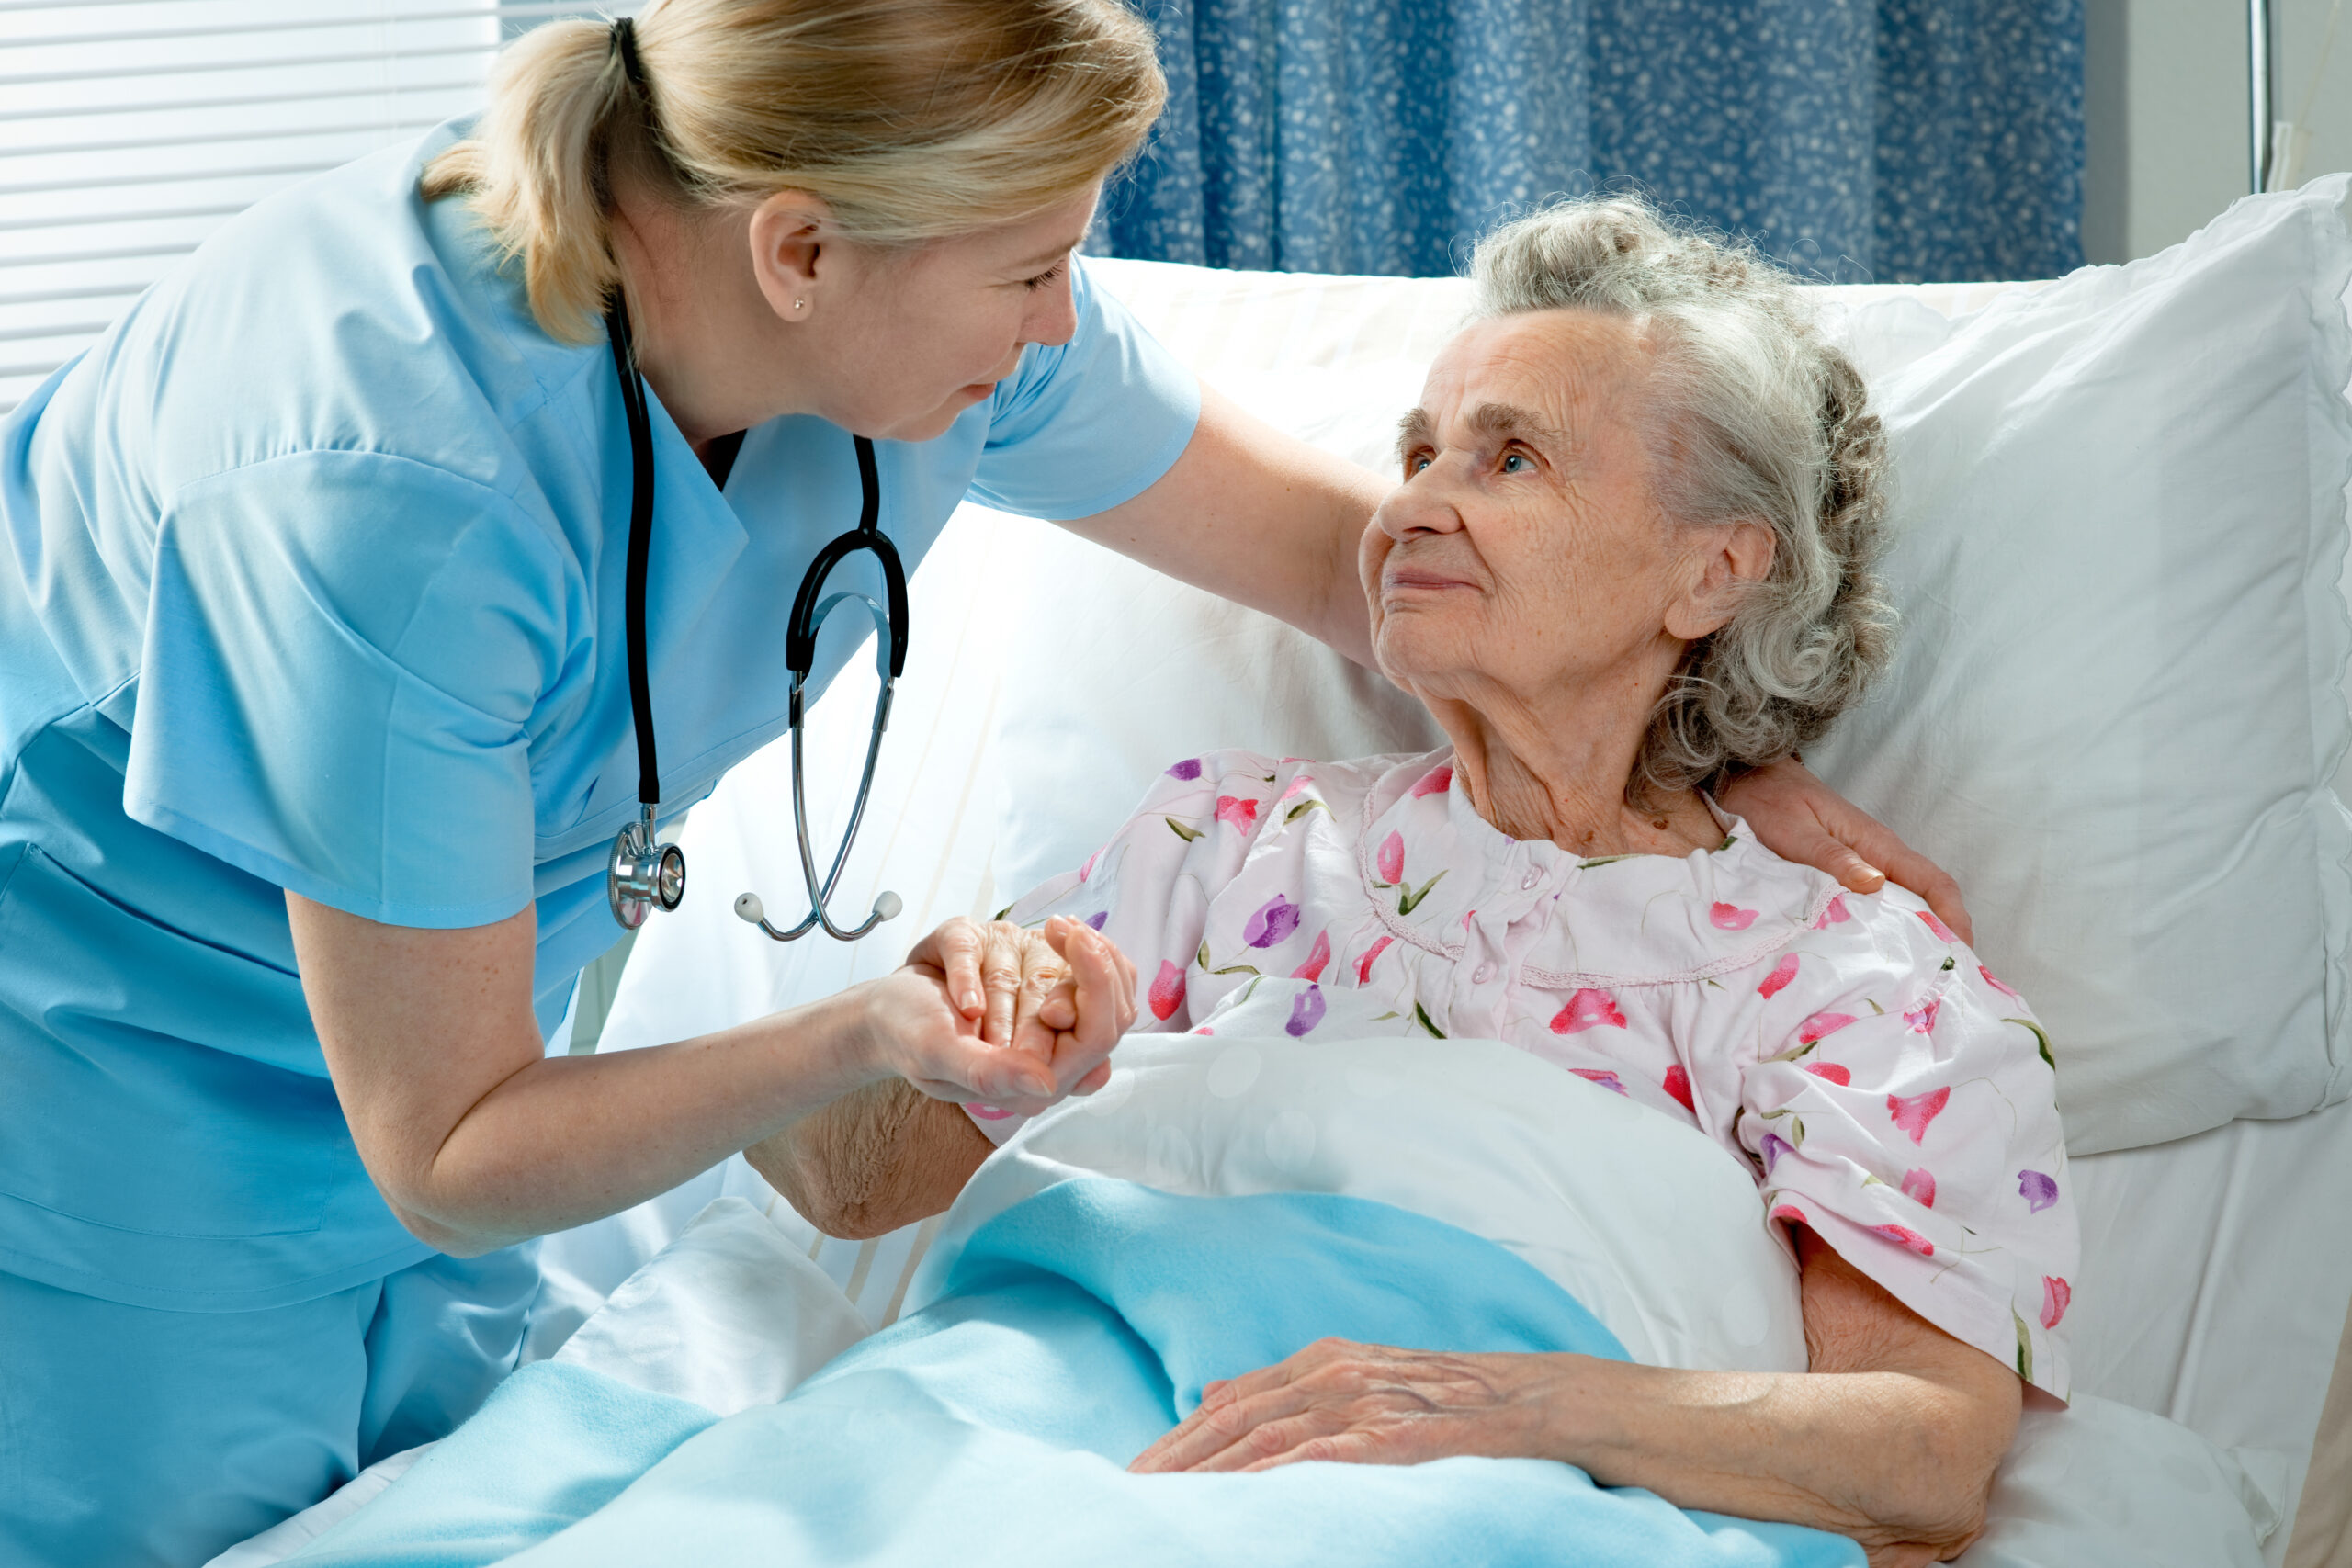 Nurse cares for a elderly patient lying in bed in hospital.